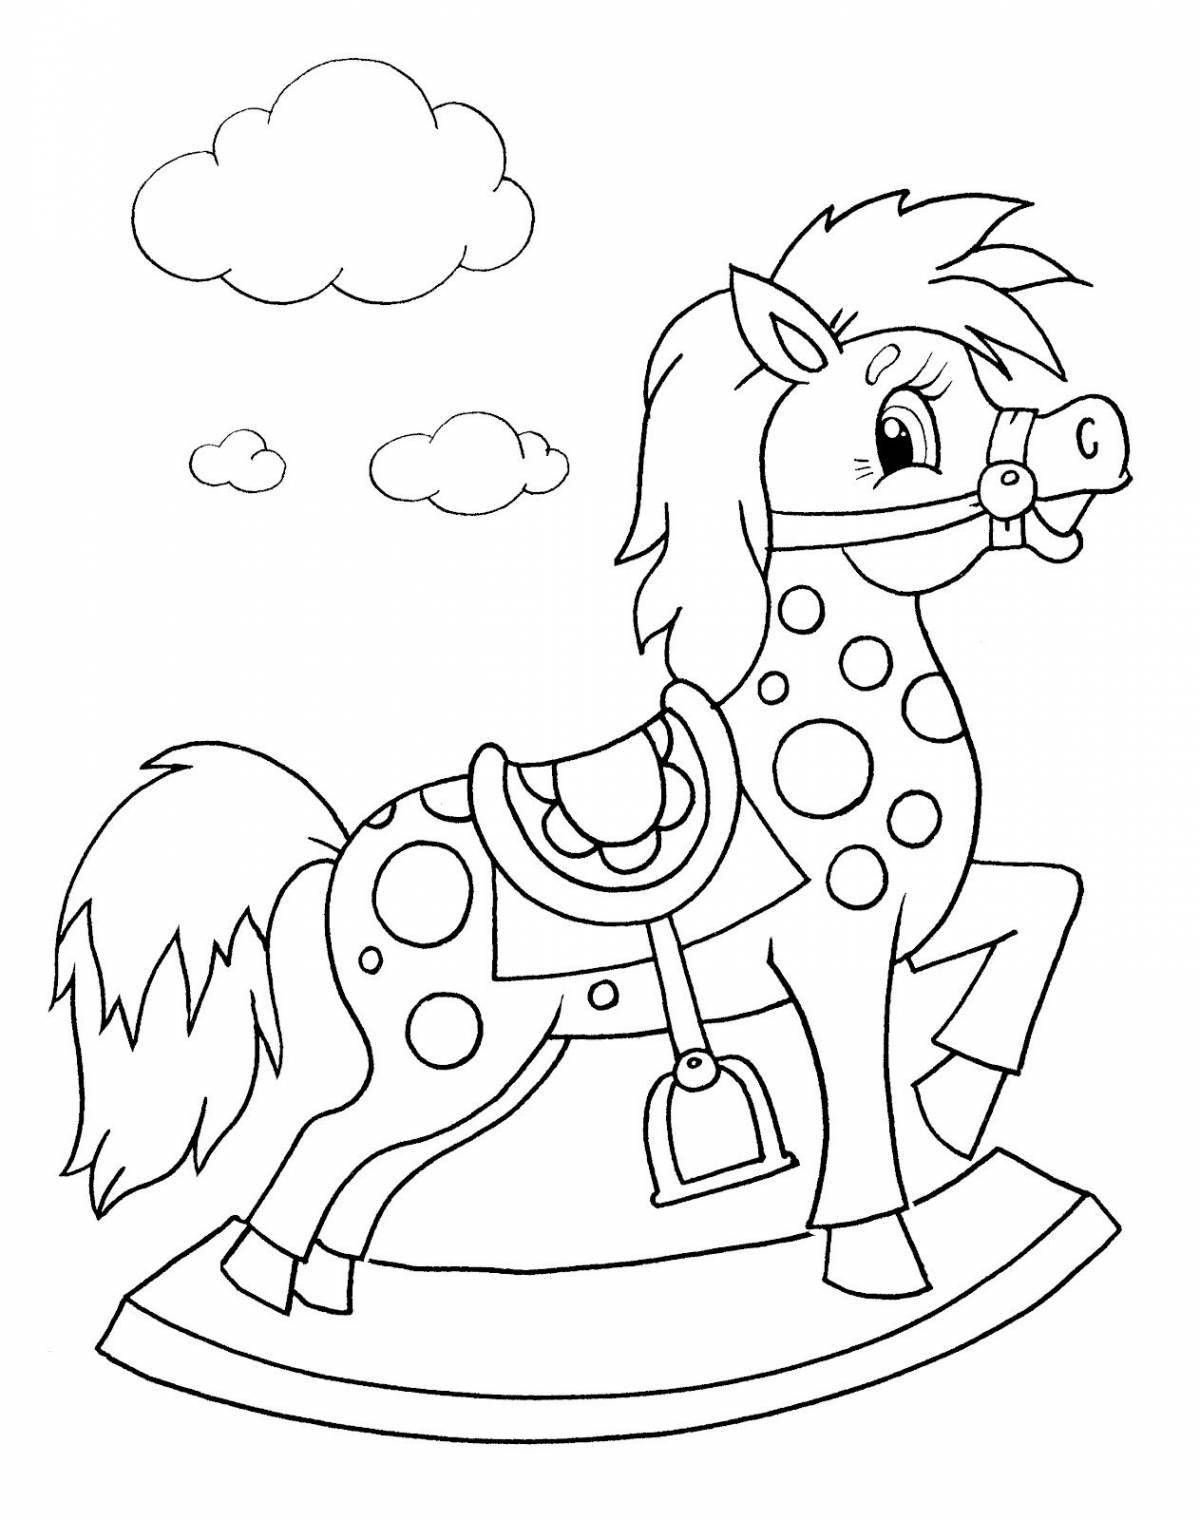 Radiant coloring page baby picture